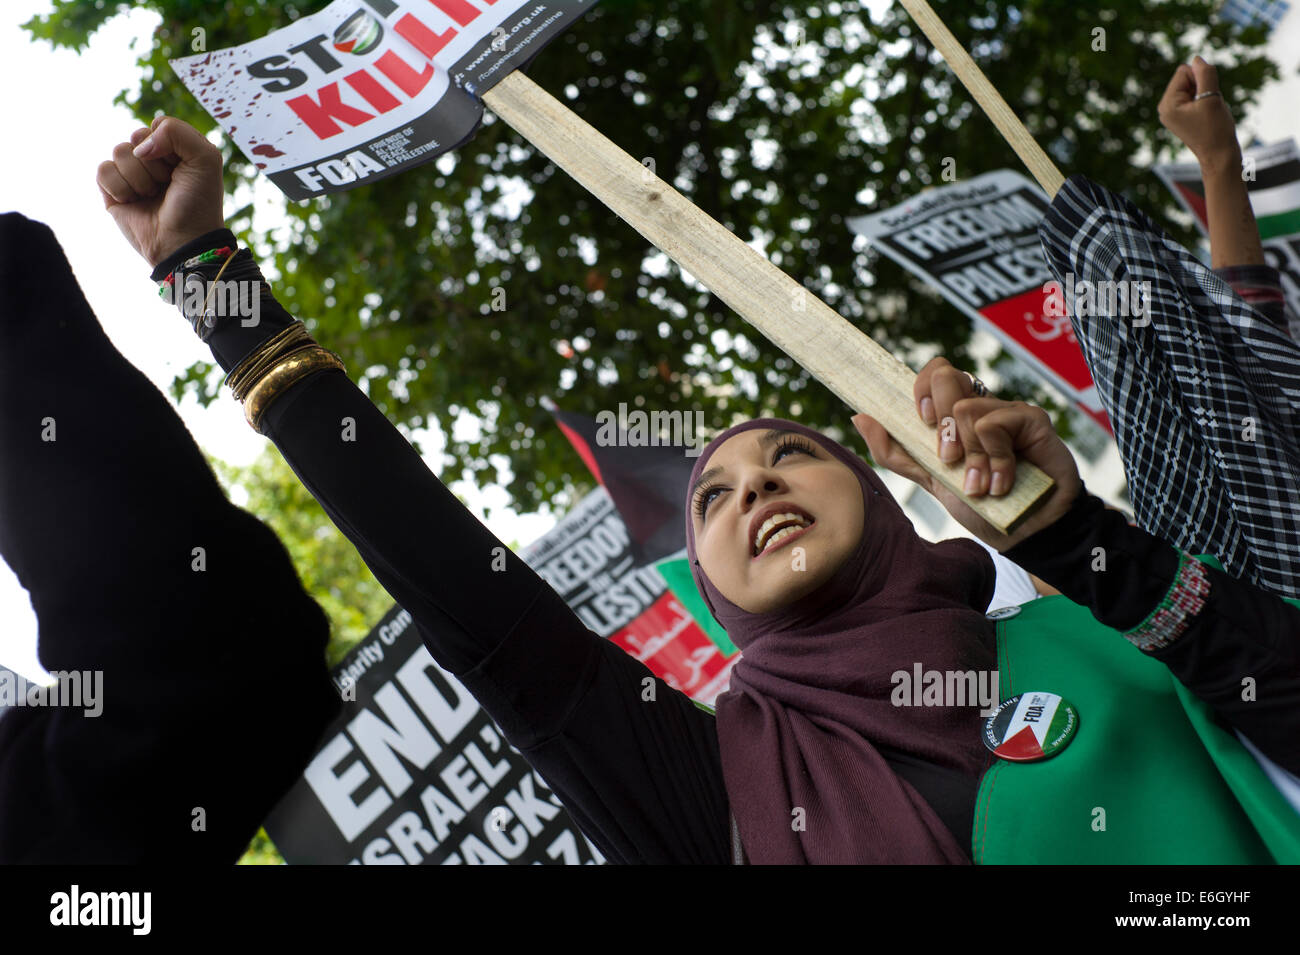 London, UK. 23rd August, 2014. Free Palestine and Free Gaza anti Israeli Demonstration opposite Prime Minister Cameron's residence Downing Street in Whitehall, London EnglandUK. 23 August 2014 The peaceful demostration was interupted very briefly by a pro Israeli demonstrator with a flag showing the Star of David. Credit:  BRIAN HARRIS/Alamy Live News Stock Photo